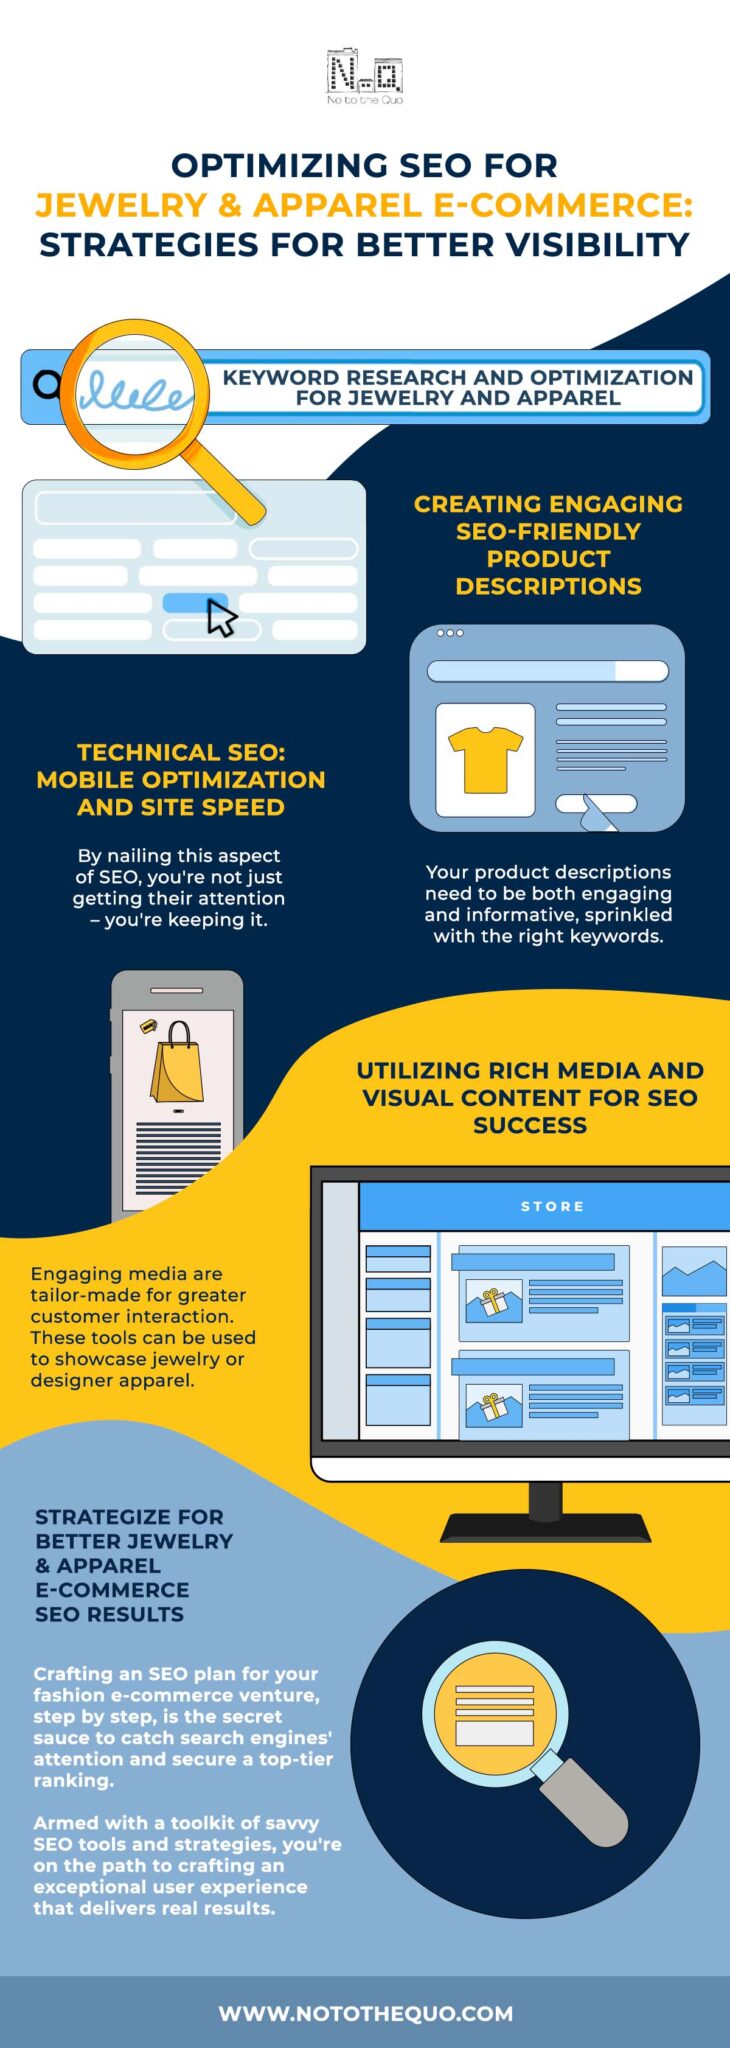 optimizing seo for jewlery and apparel-infographic